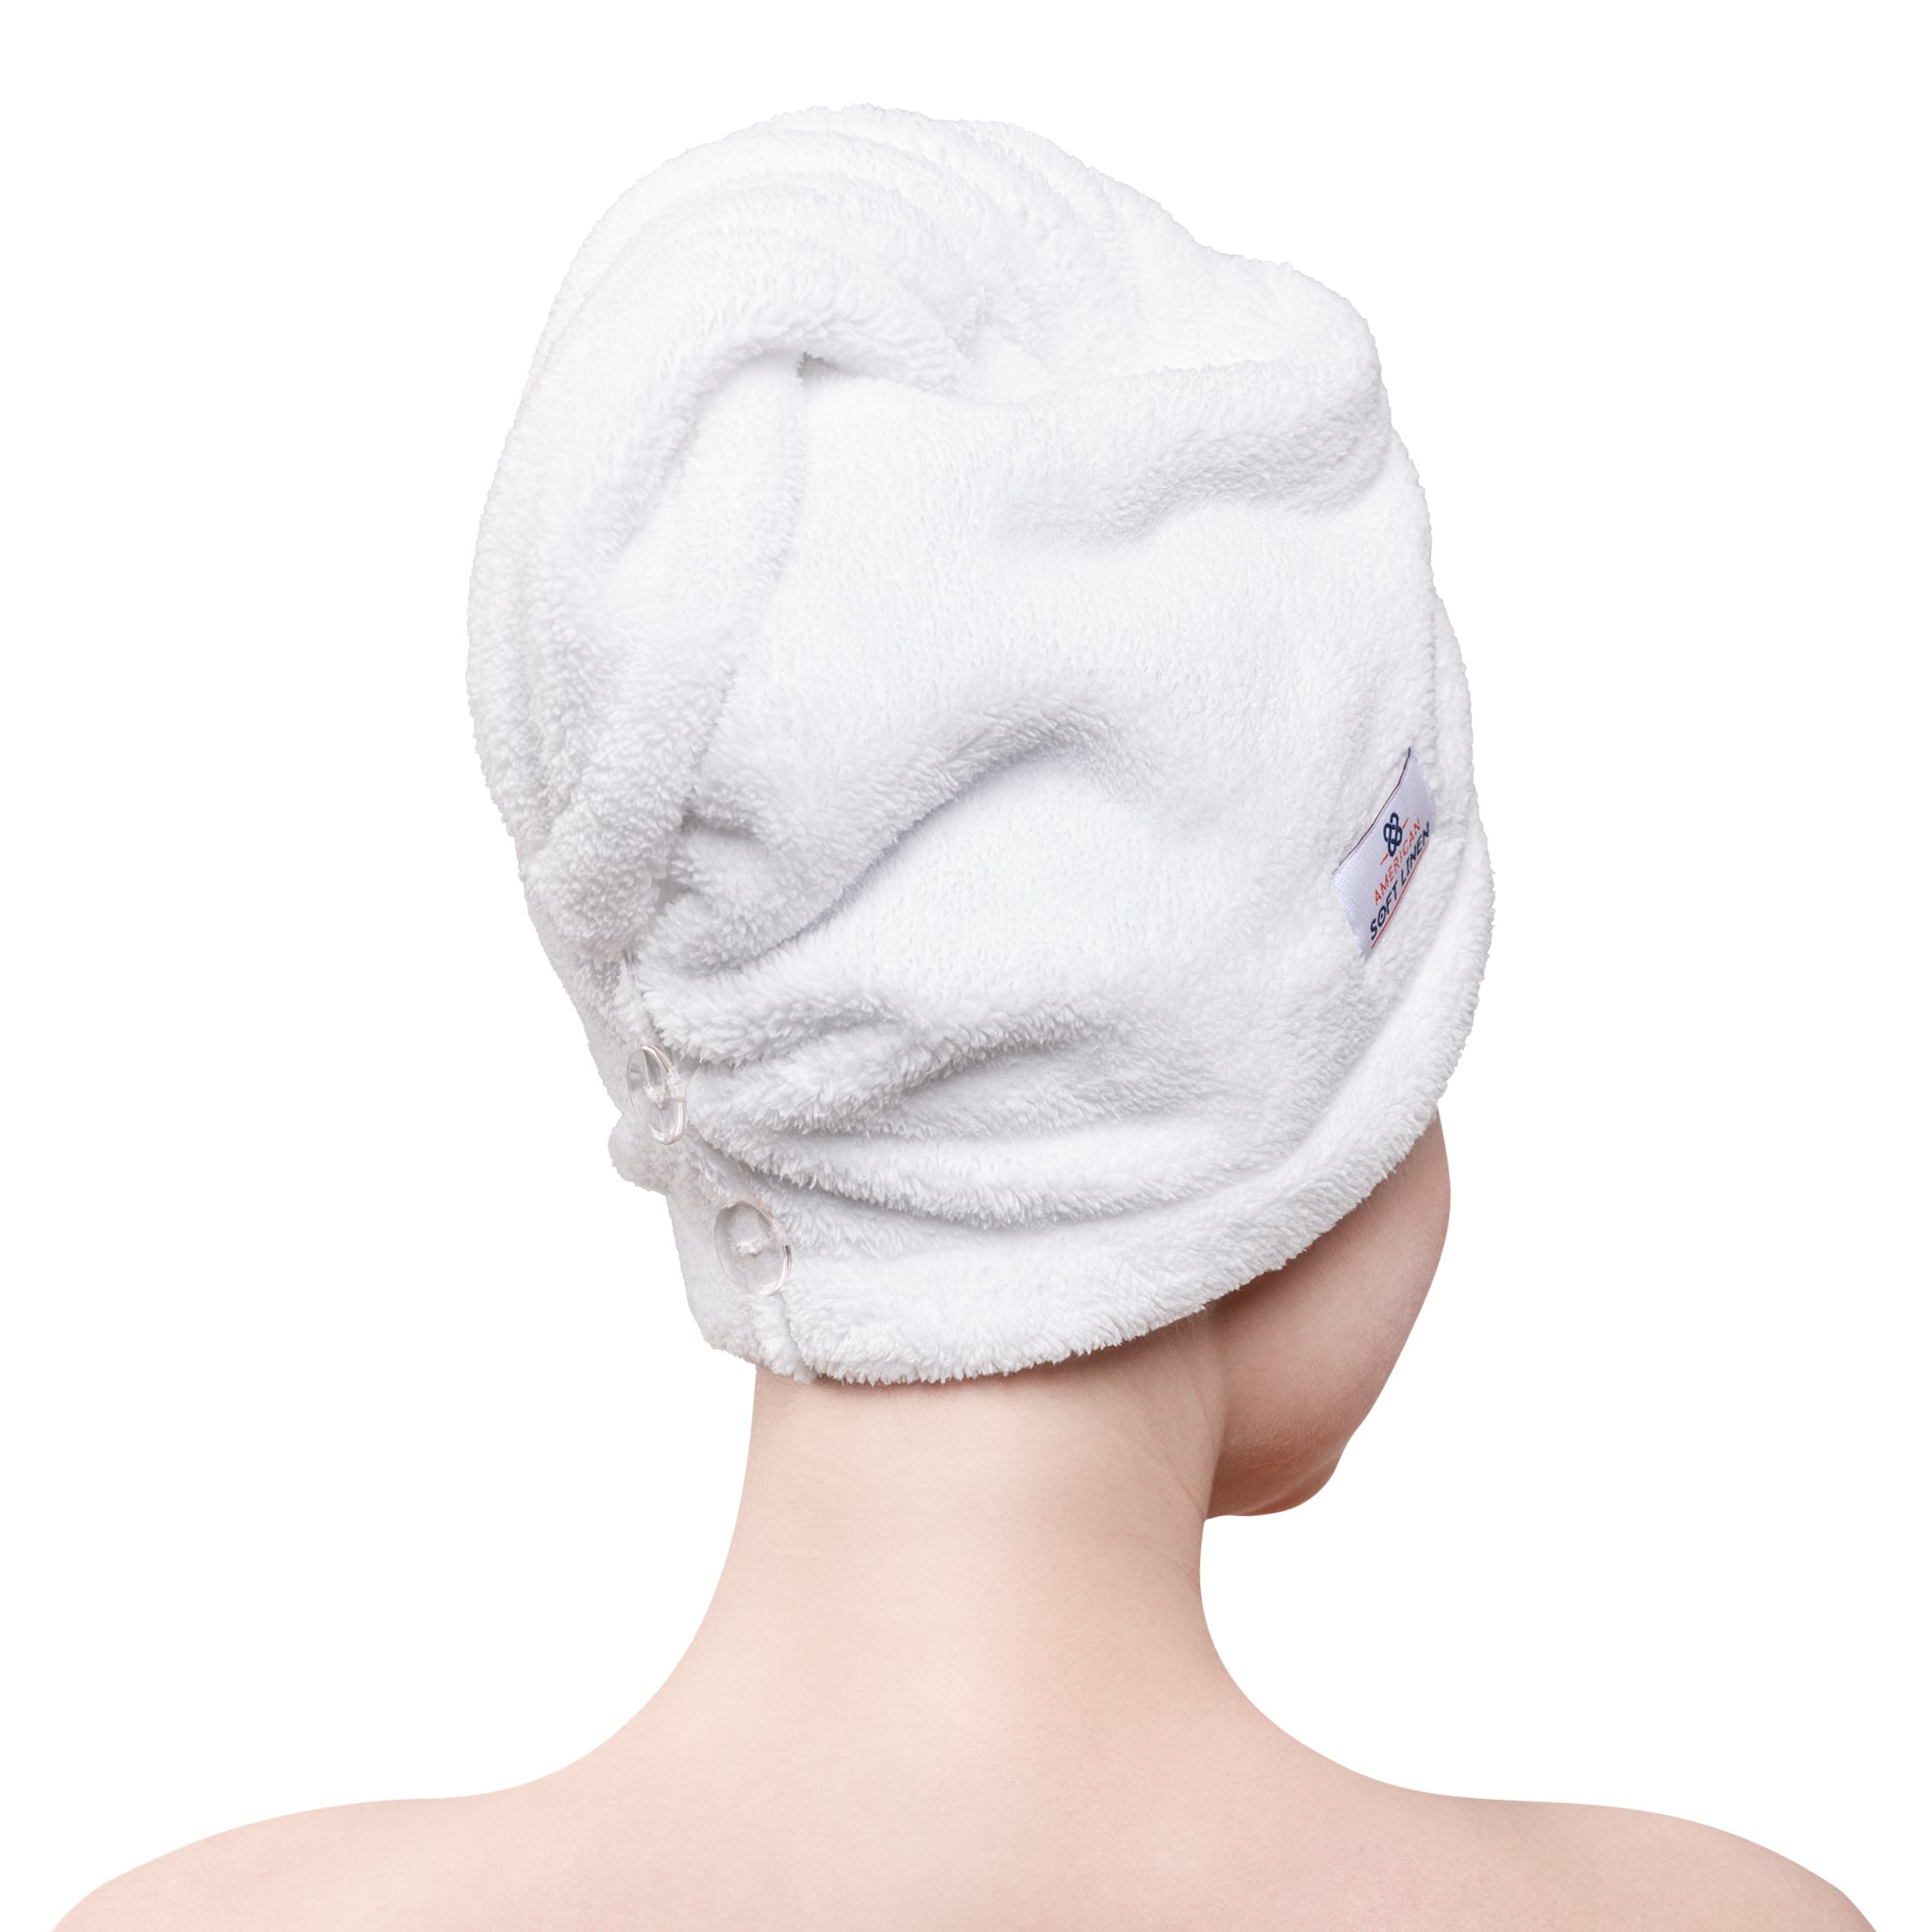 American Soft Linen Extremely Soft Super Absorbent and Fast Drying Hair Towel -2-packed-white-3